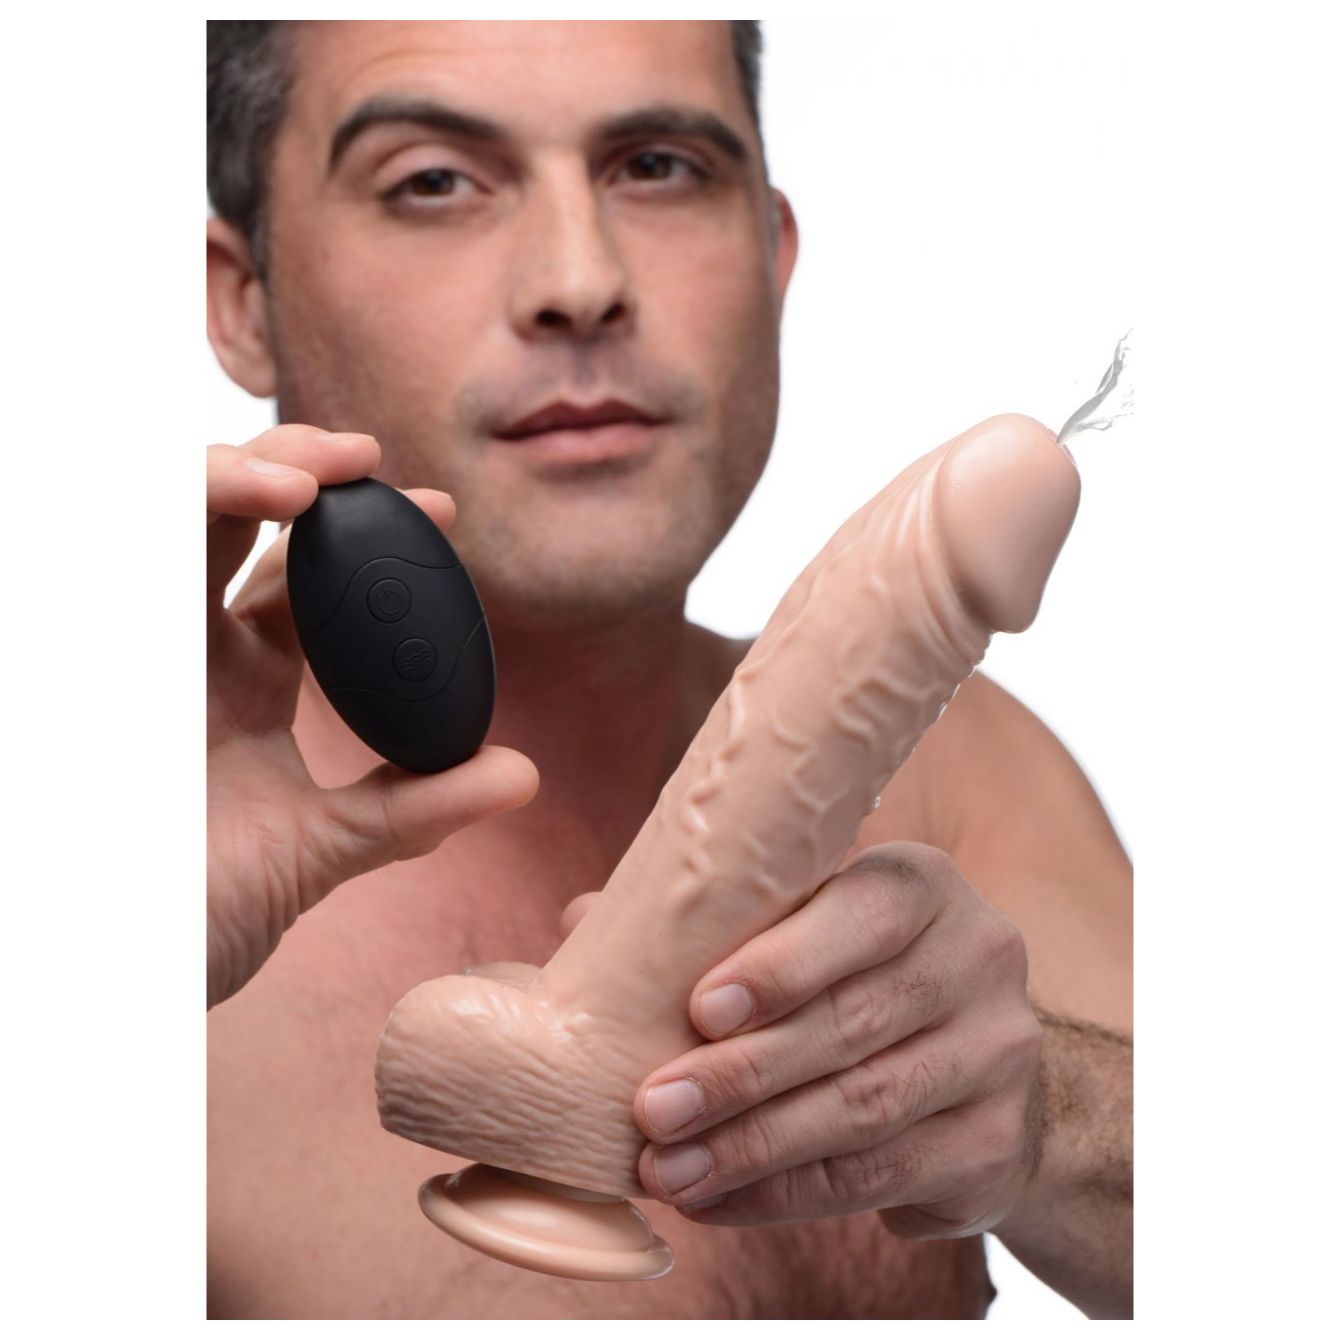 8.5 INCH VIBRATING SQUIRTING DILDO WITH REMOTE CONTROL - LIGHT